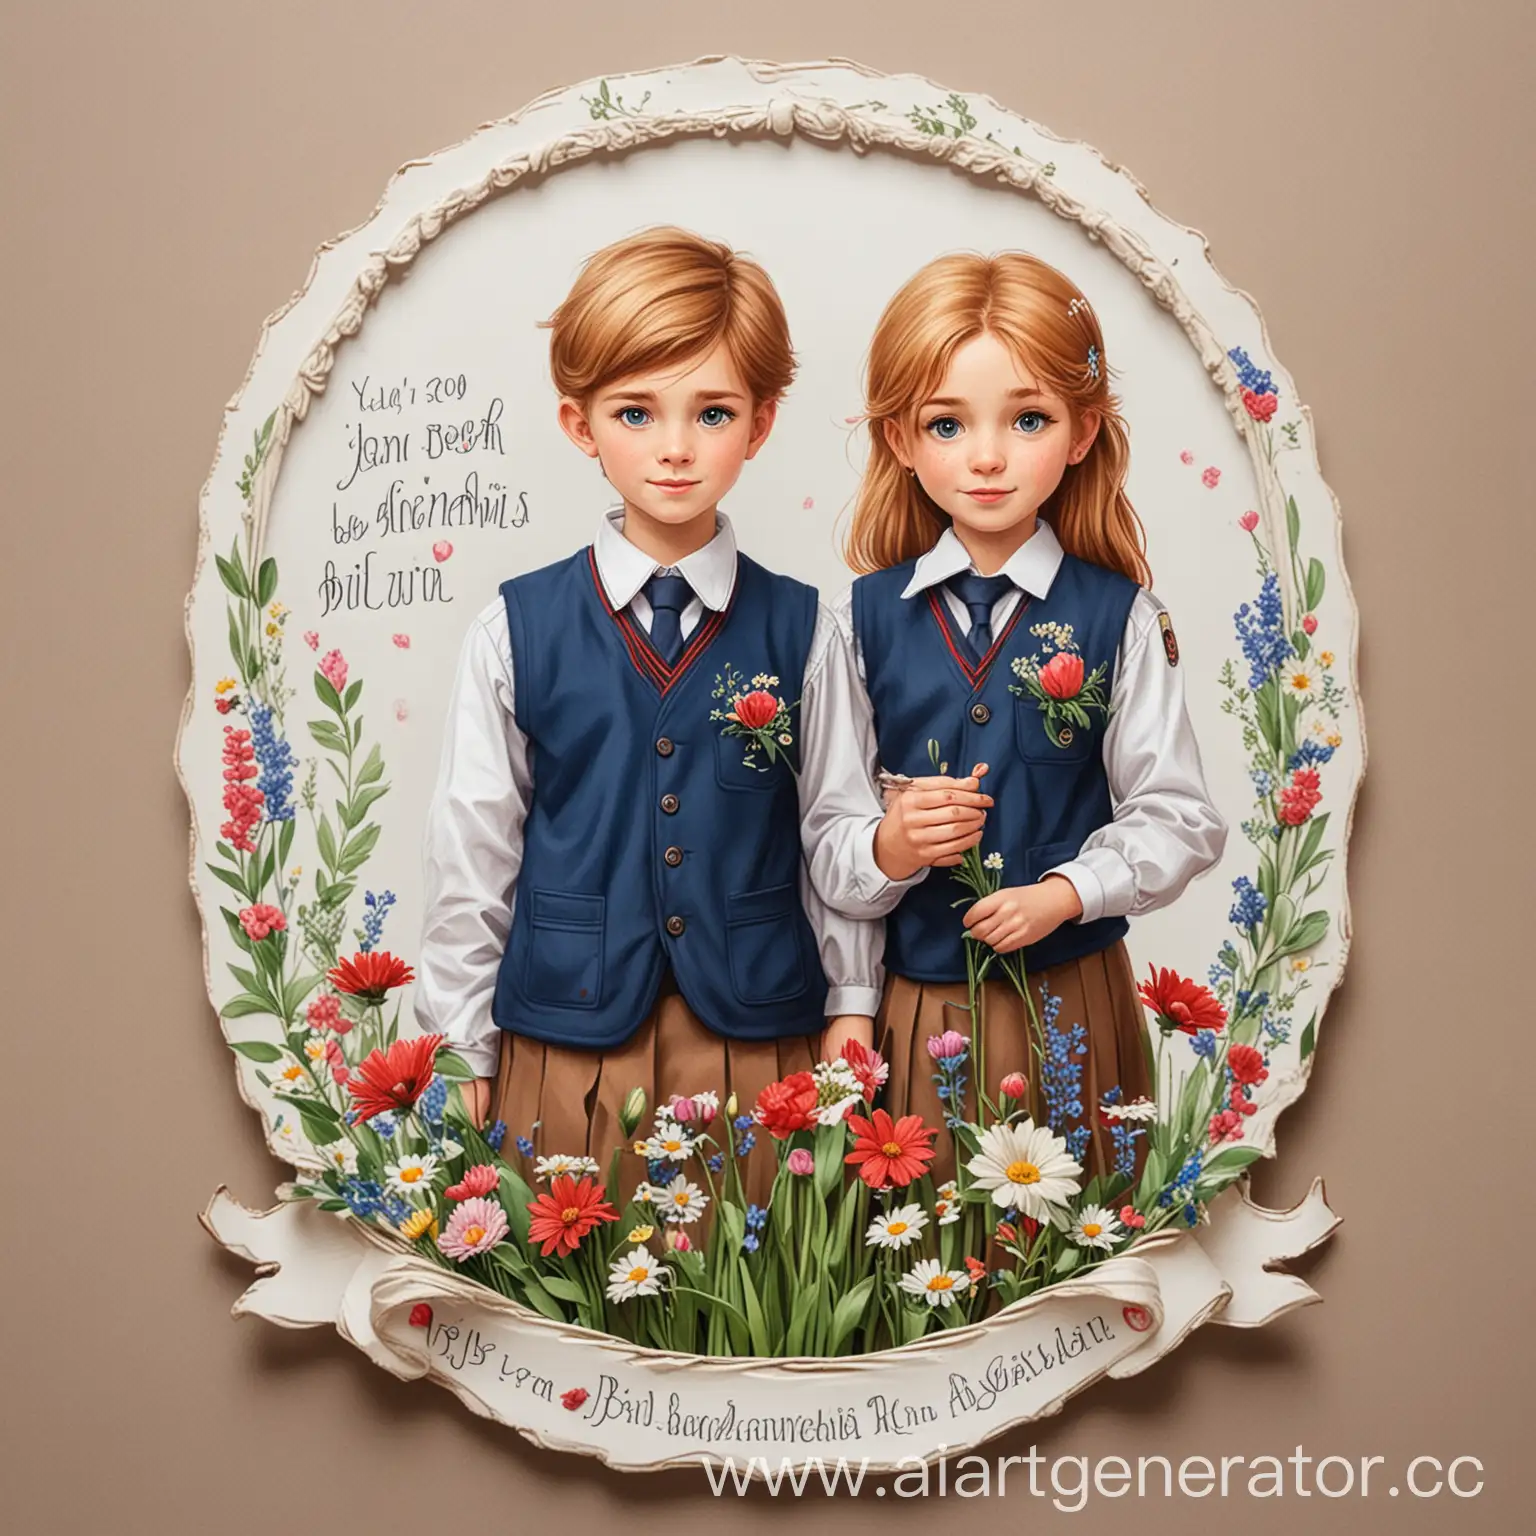 Graduating-Boy-and-Girl-in-School-Uniforms-with-Flowers-Best-Wishes